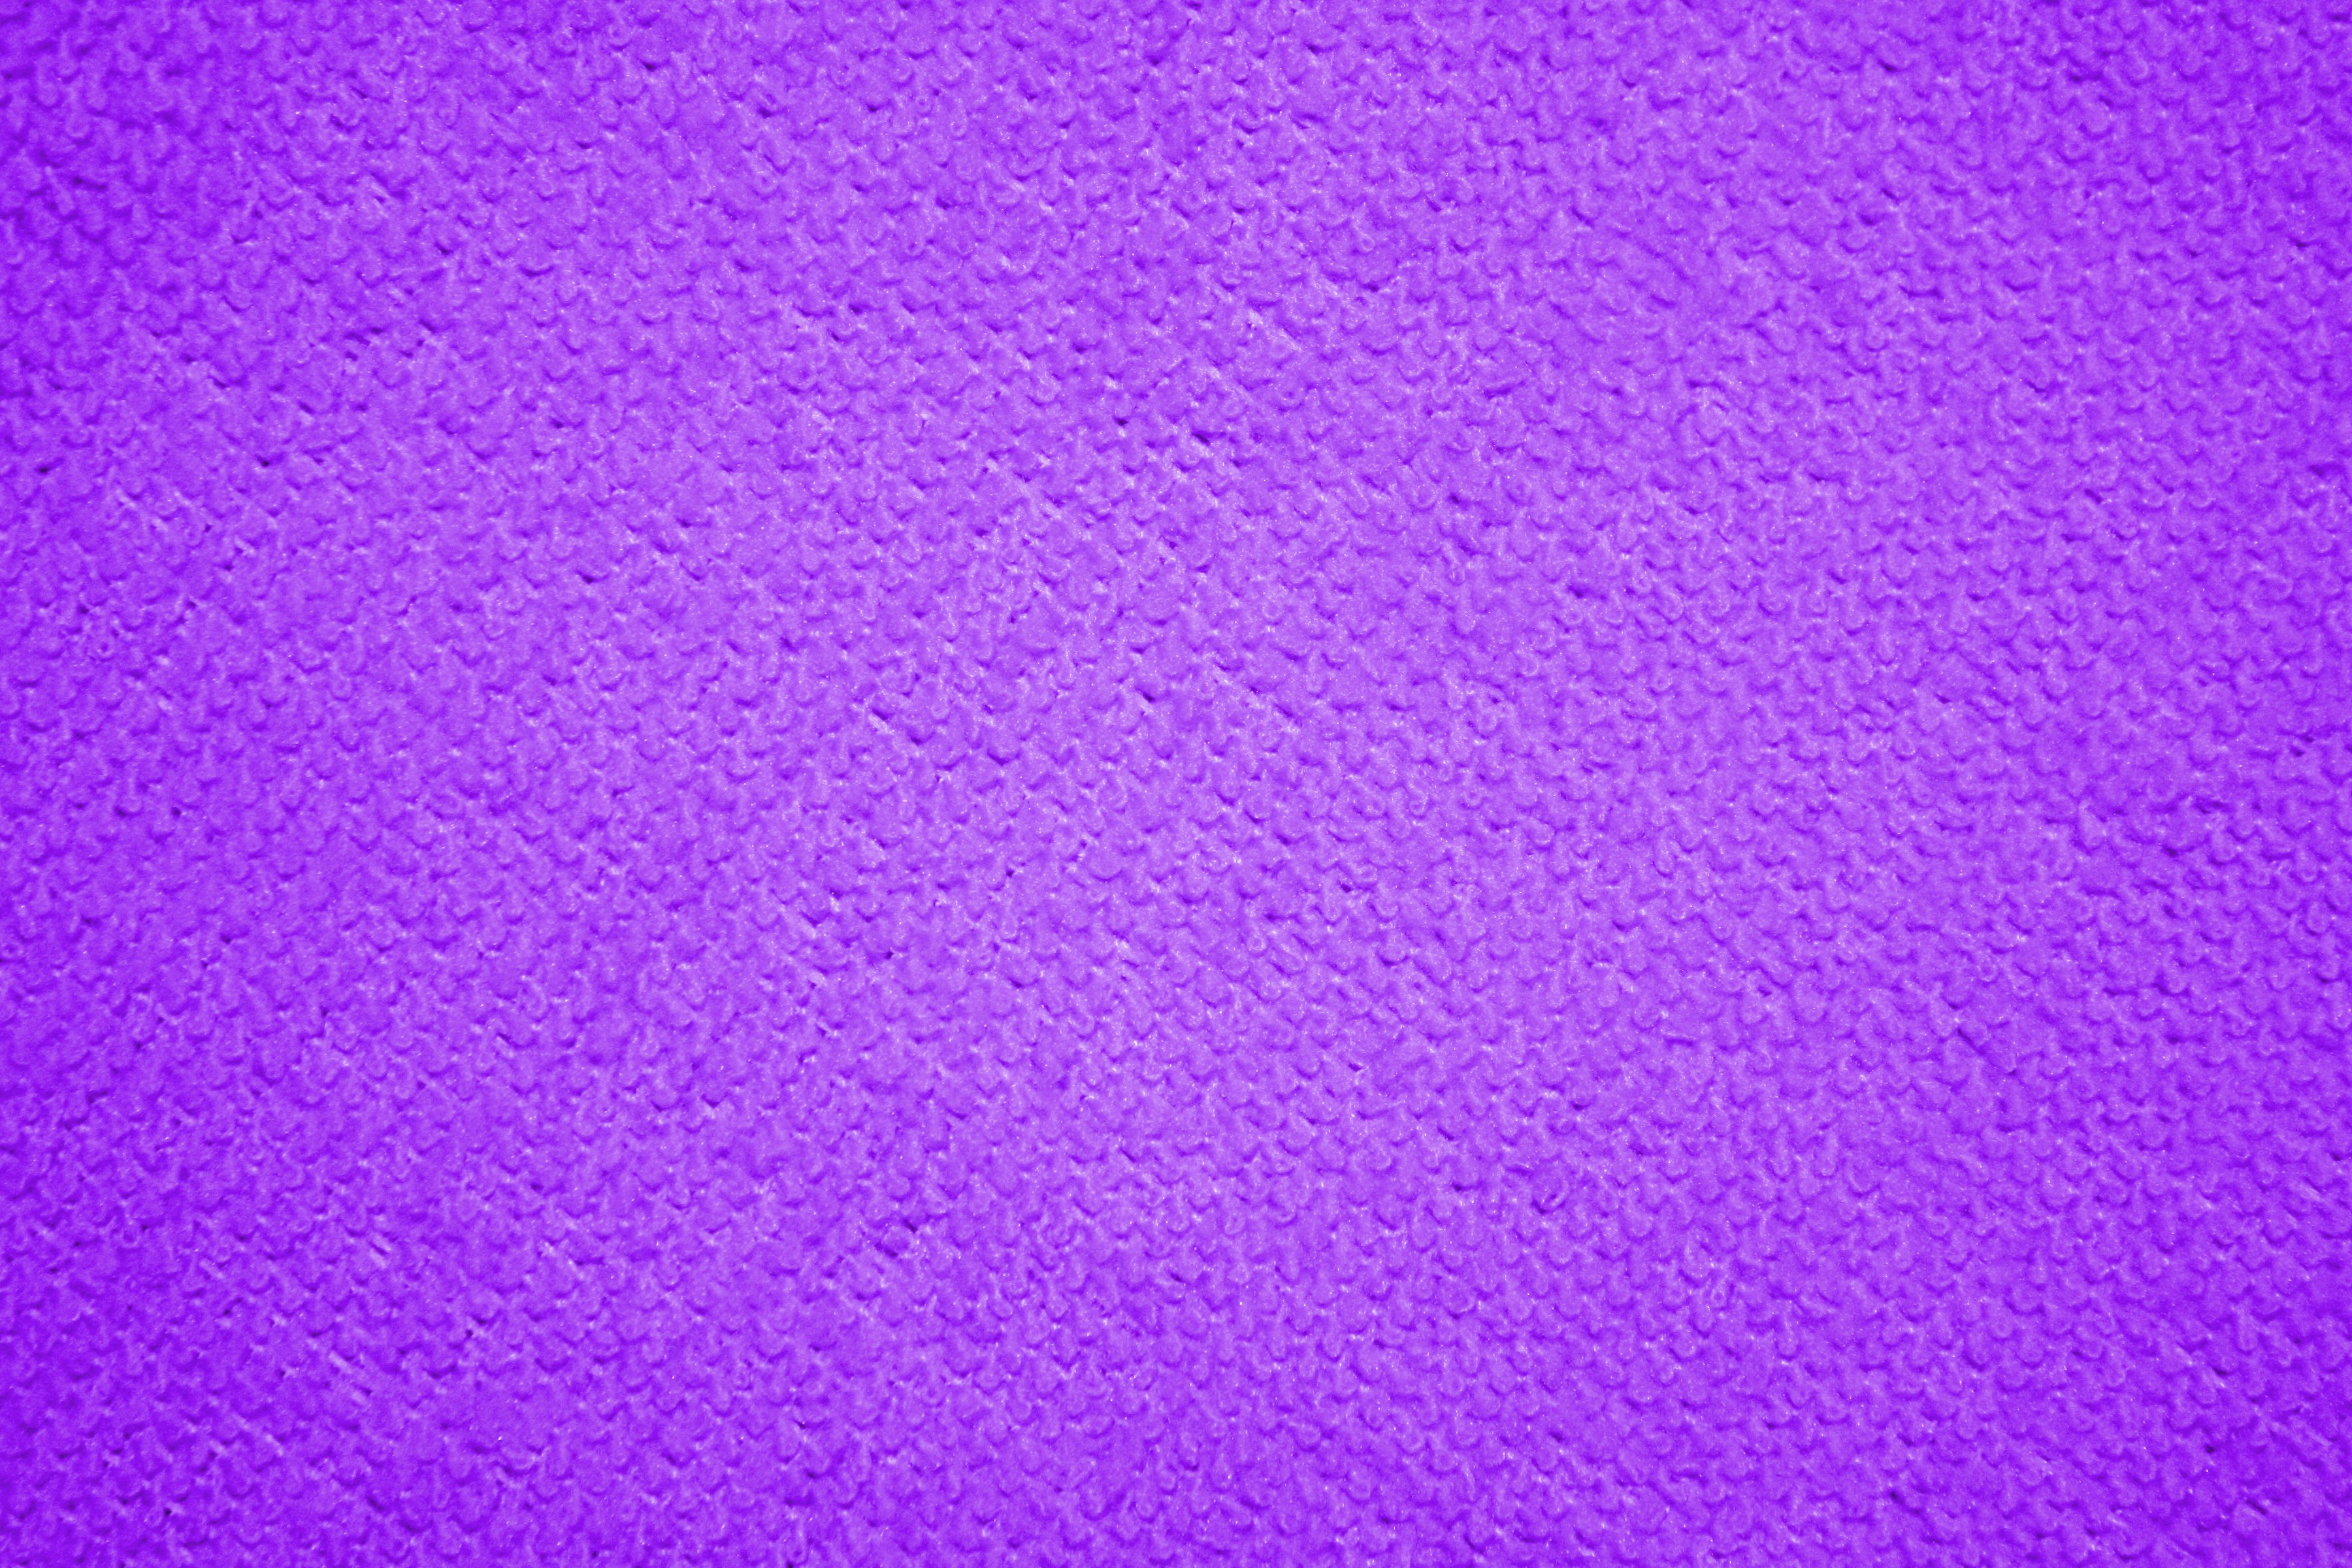 Lavender Fabric Texture Picture, Free Photograph